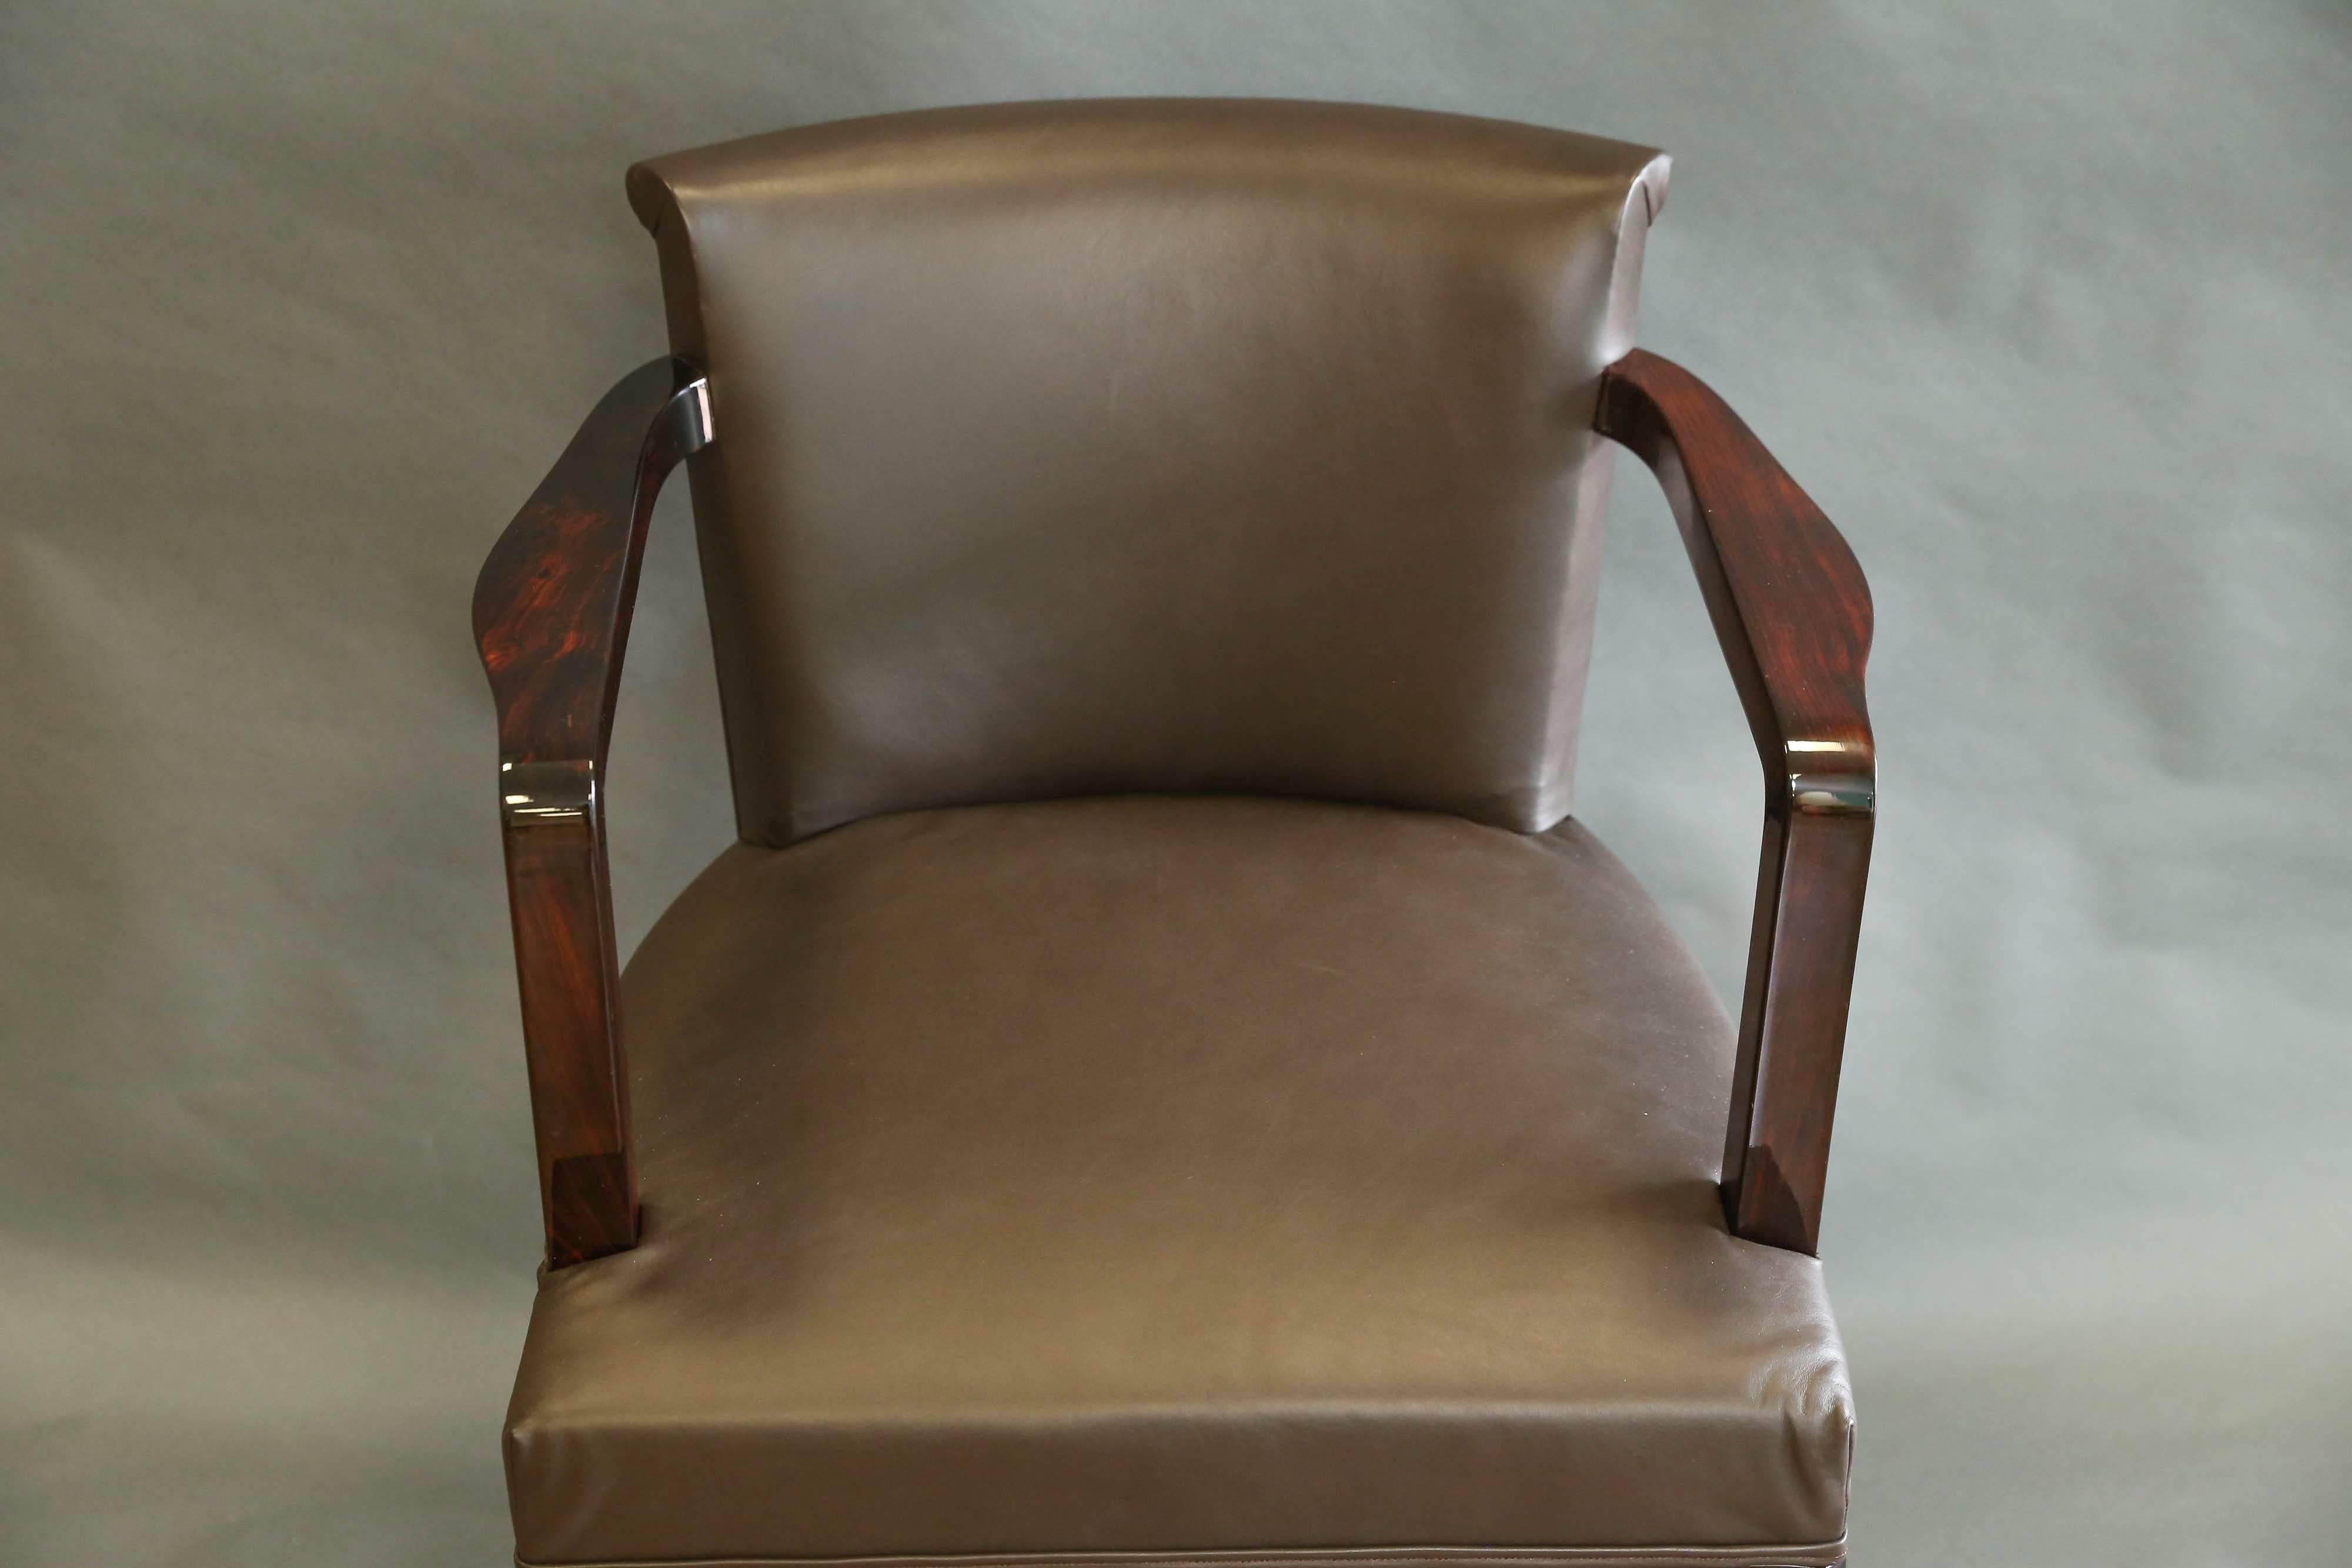 Office chair is done in a fine walnut wood, newly re-upholstered in brown leather. It has two armrests and elevated by the four elongated wooden legs. 
Condition is perfect. Restored.

Hungary, circa 1930s

Measures: 22” W x 21” D x 30” H.
 